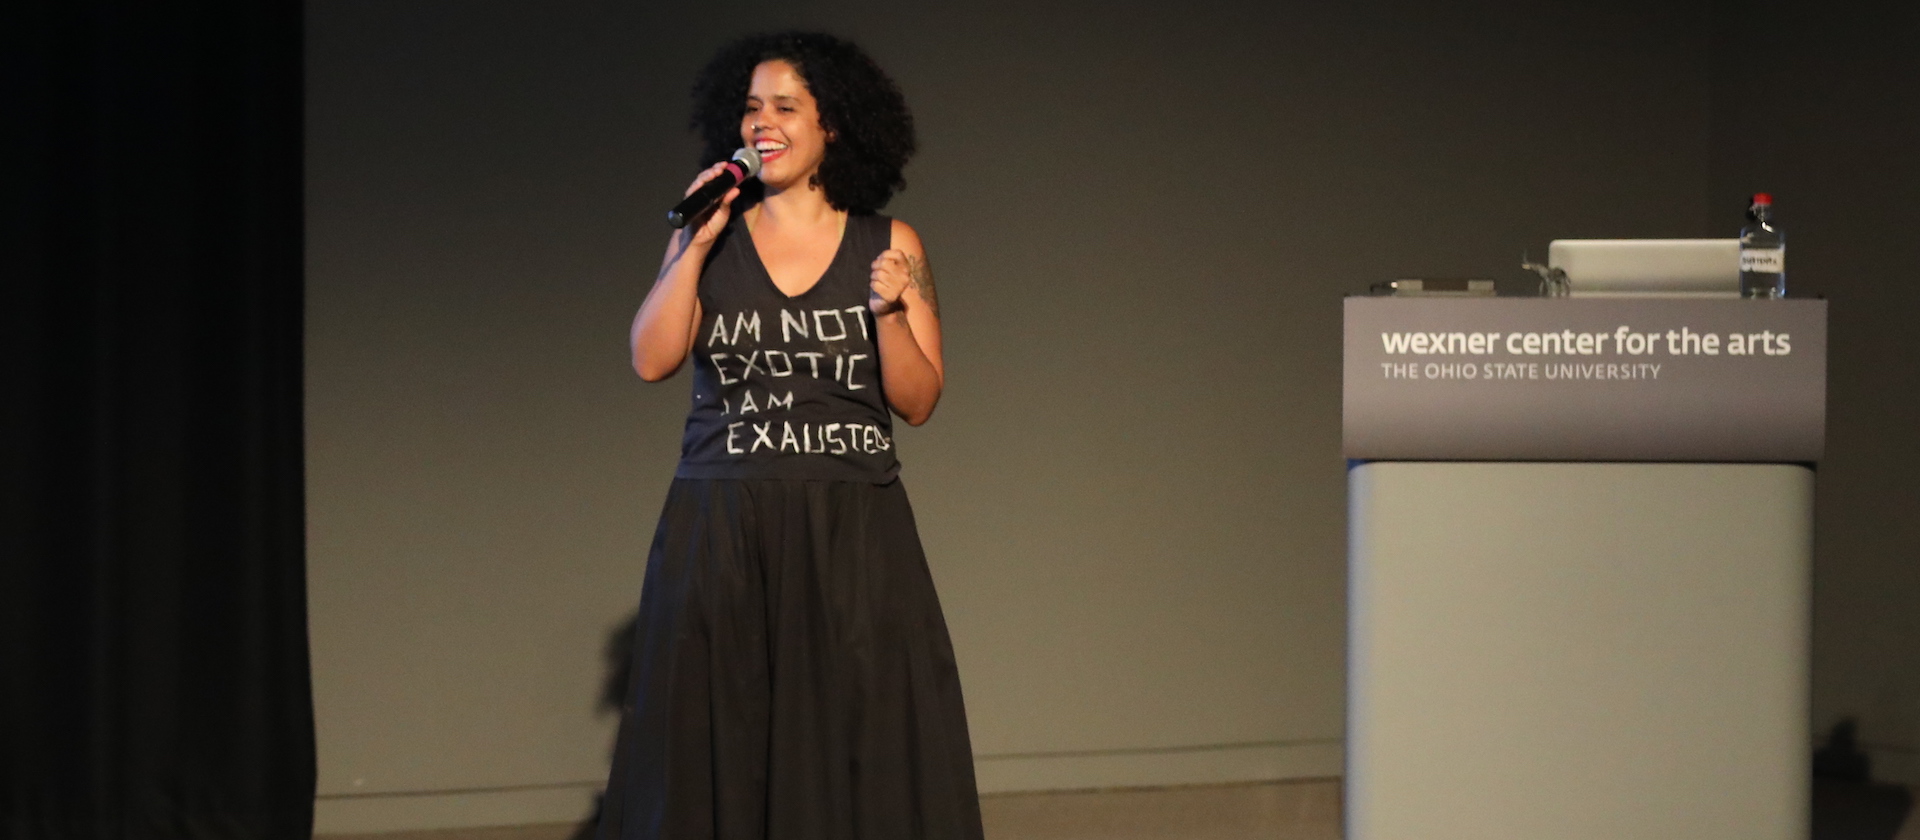 Artist Awilda Rodriguez Lora speaking at the Wexner Center for the Arts